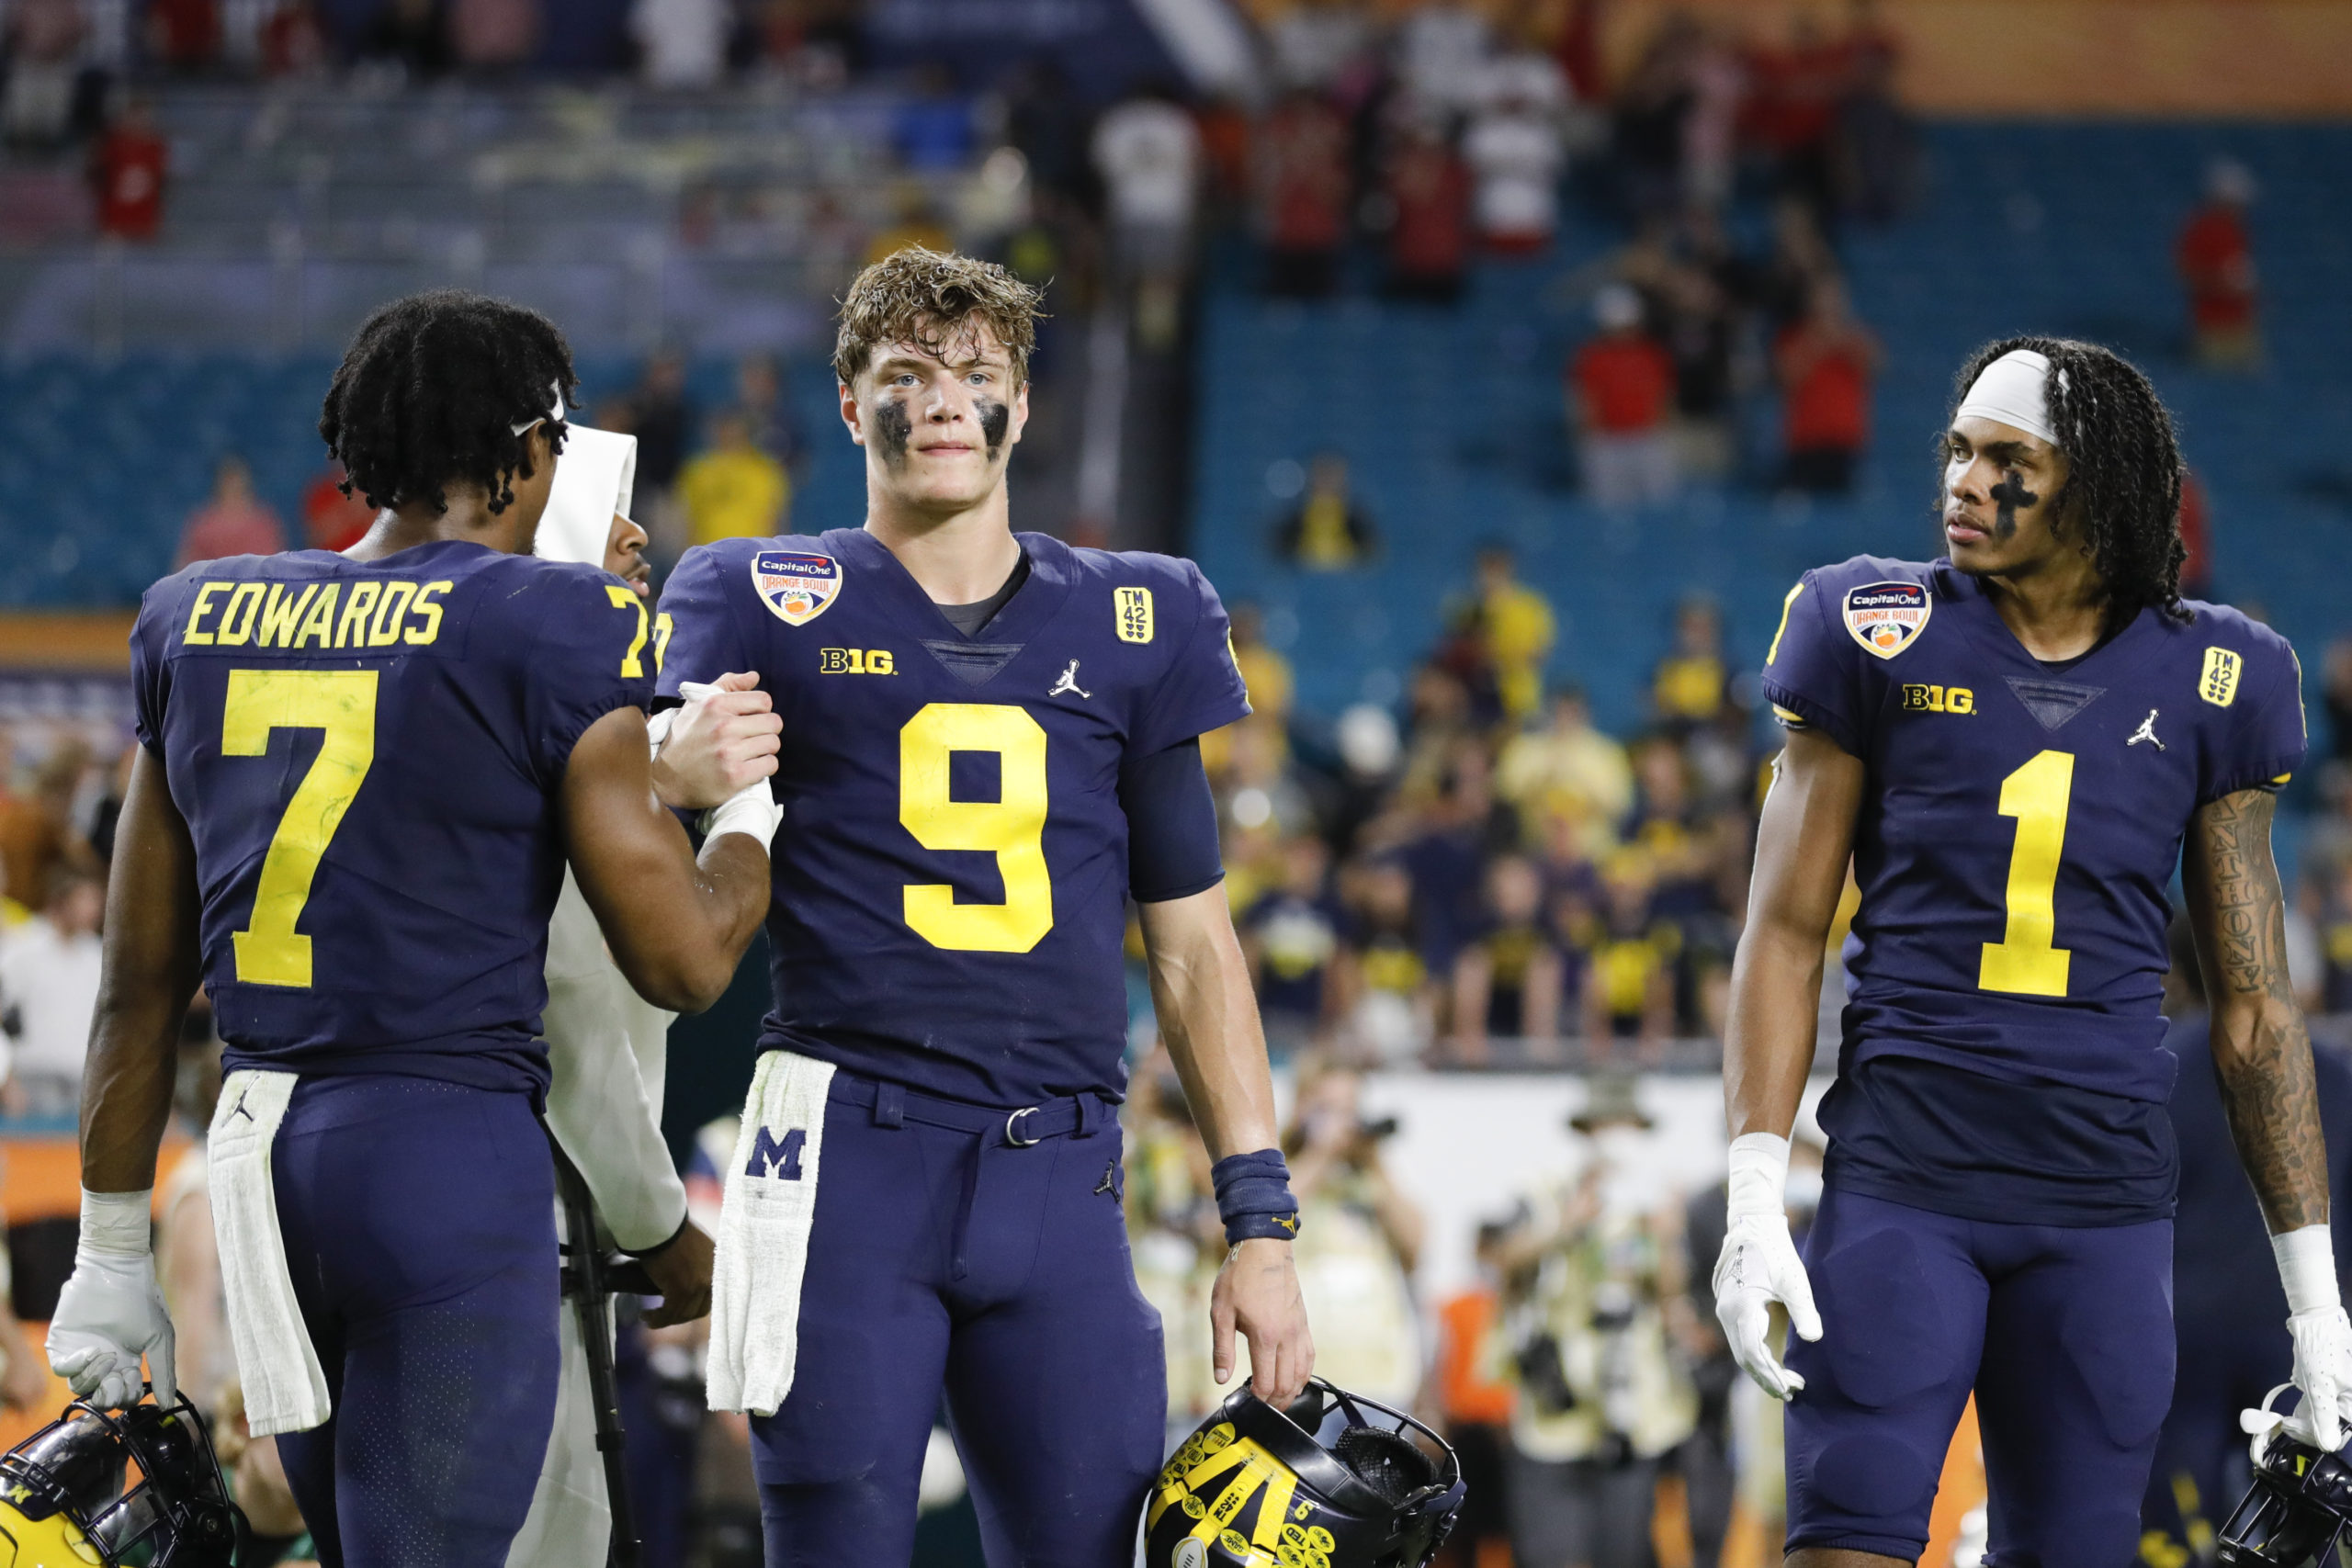 J.J. McCarthy reacts to Jim Harbaugh's interest in the NFL, his Michigan future